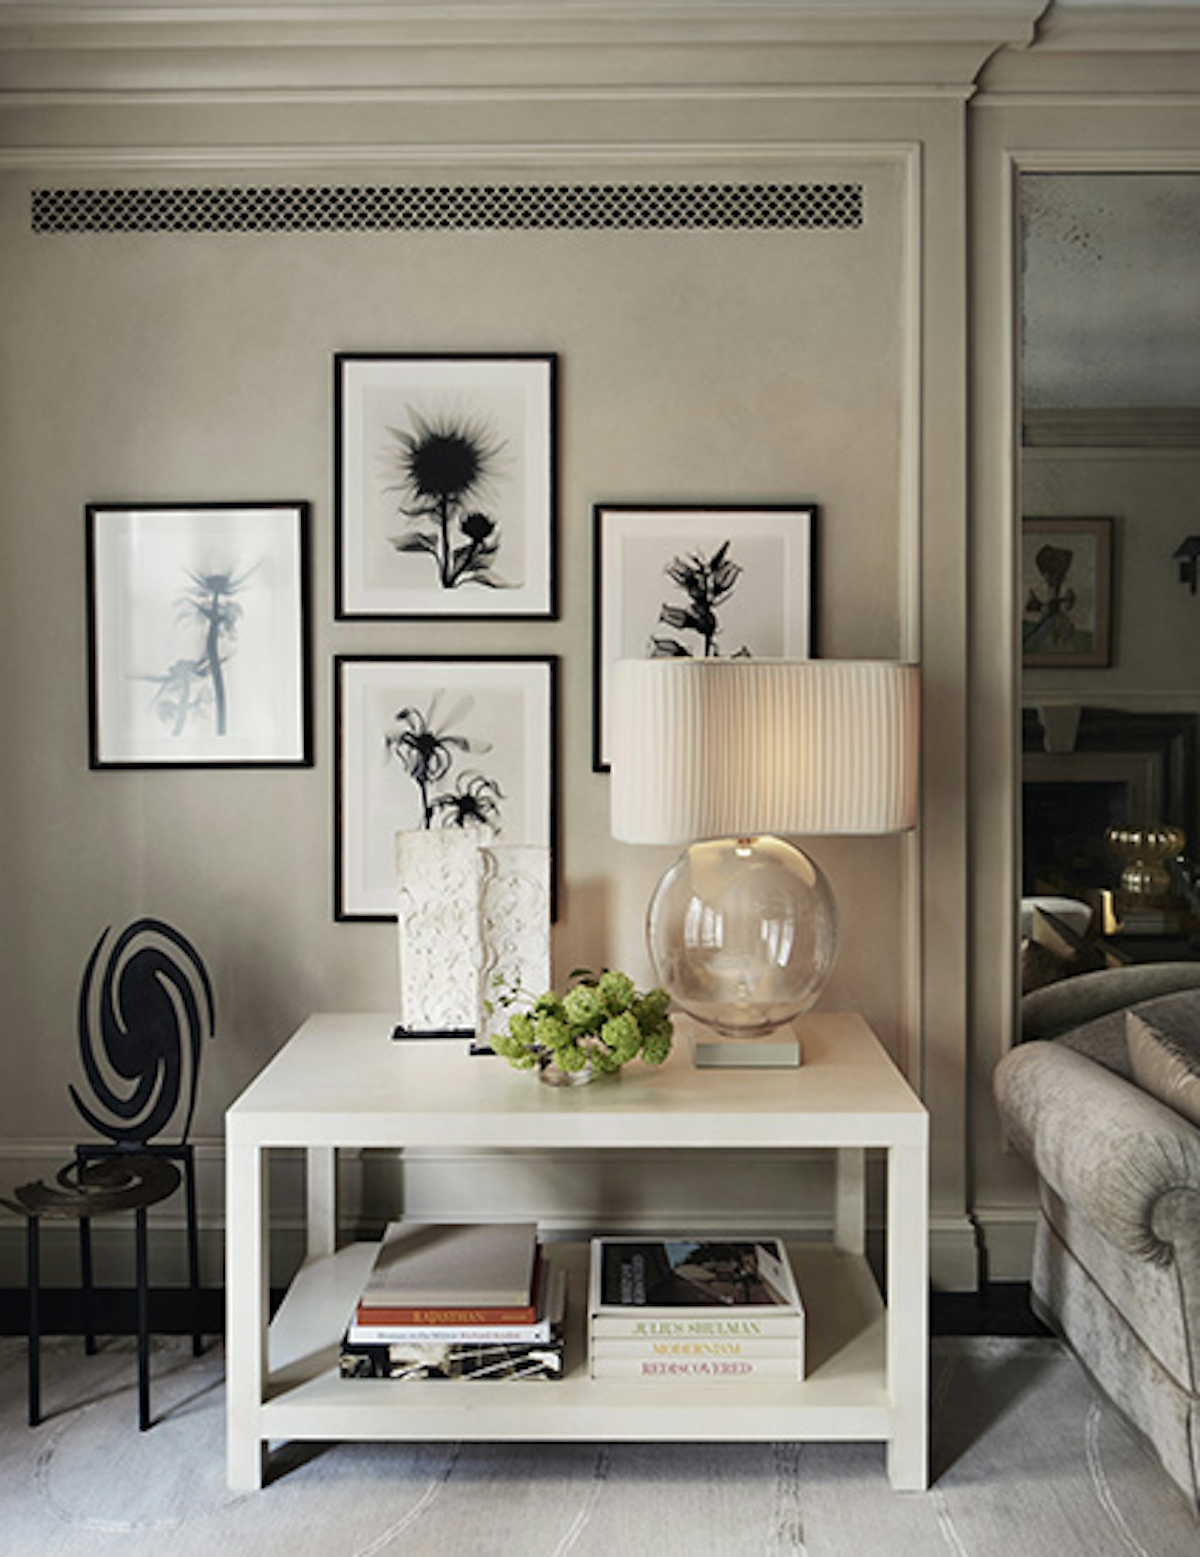 wall-art-ideas-how-to-create-a-gallery-wall-sandra-nunnerley - LuxDeco Style Guide